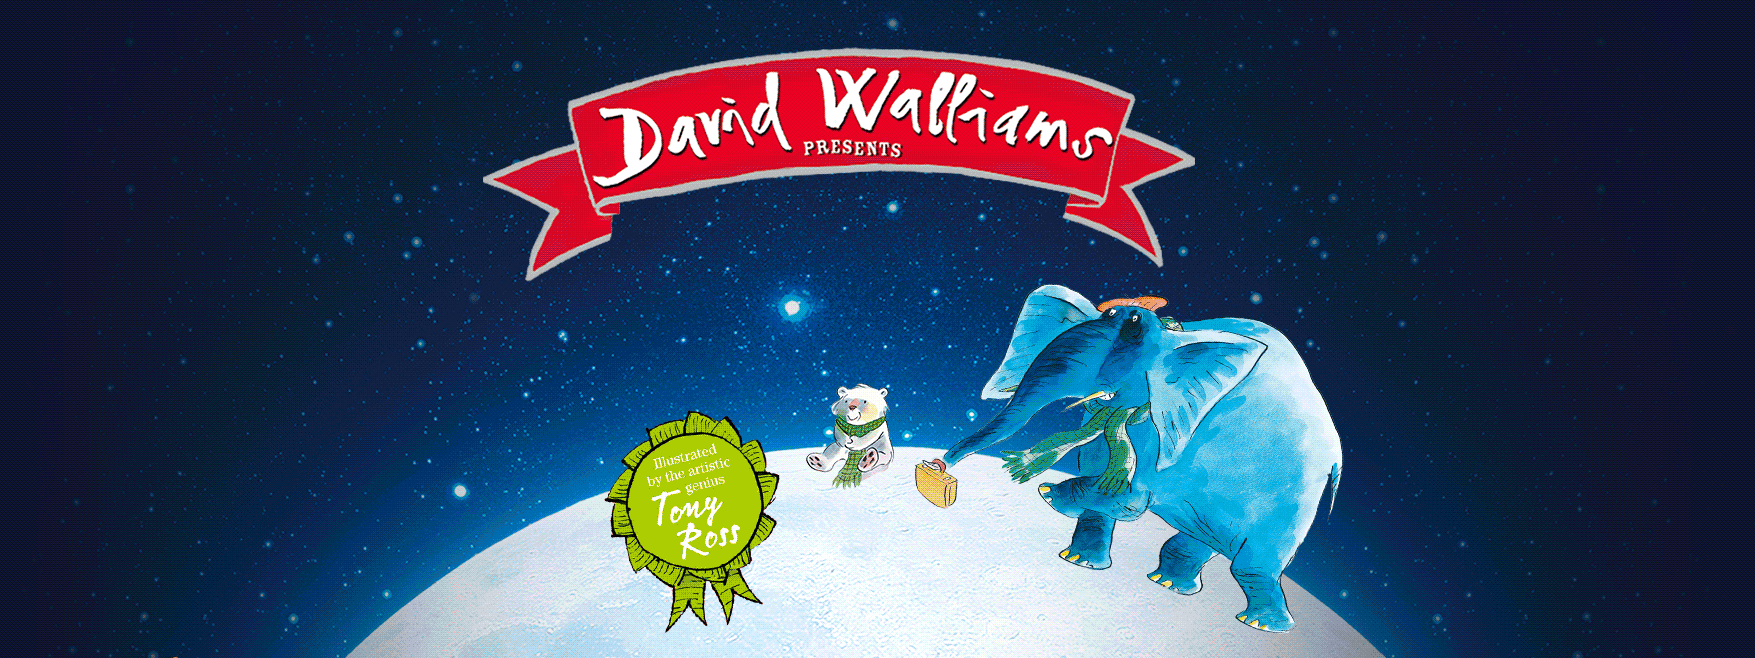 Picture Books For Little Ones The World Of David Walliams